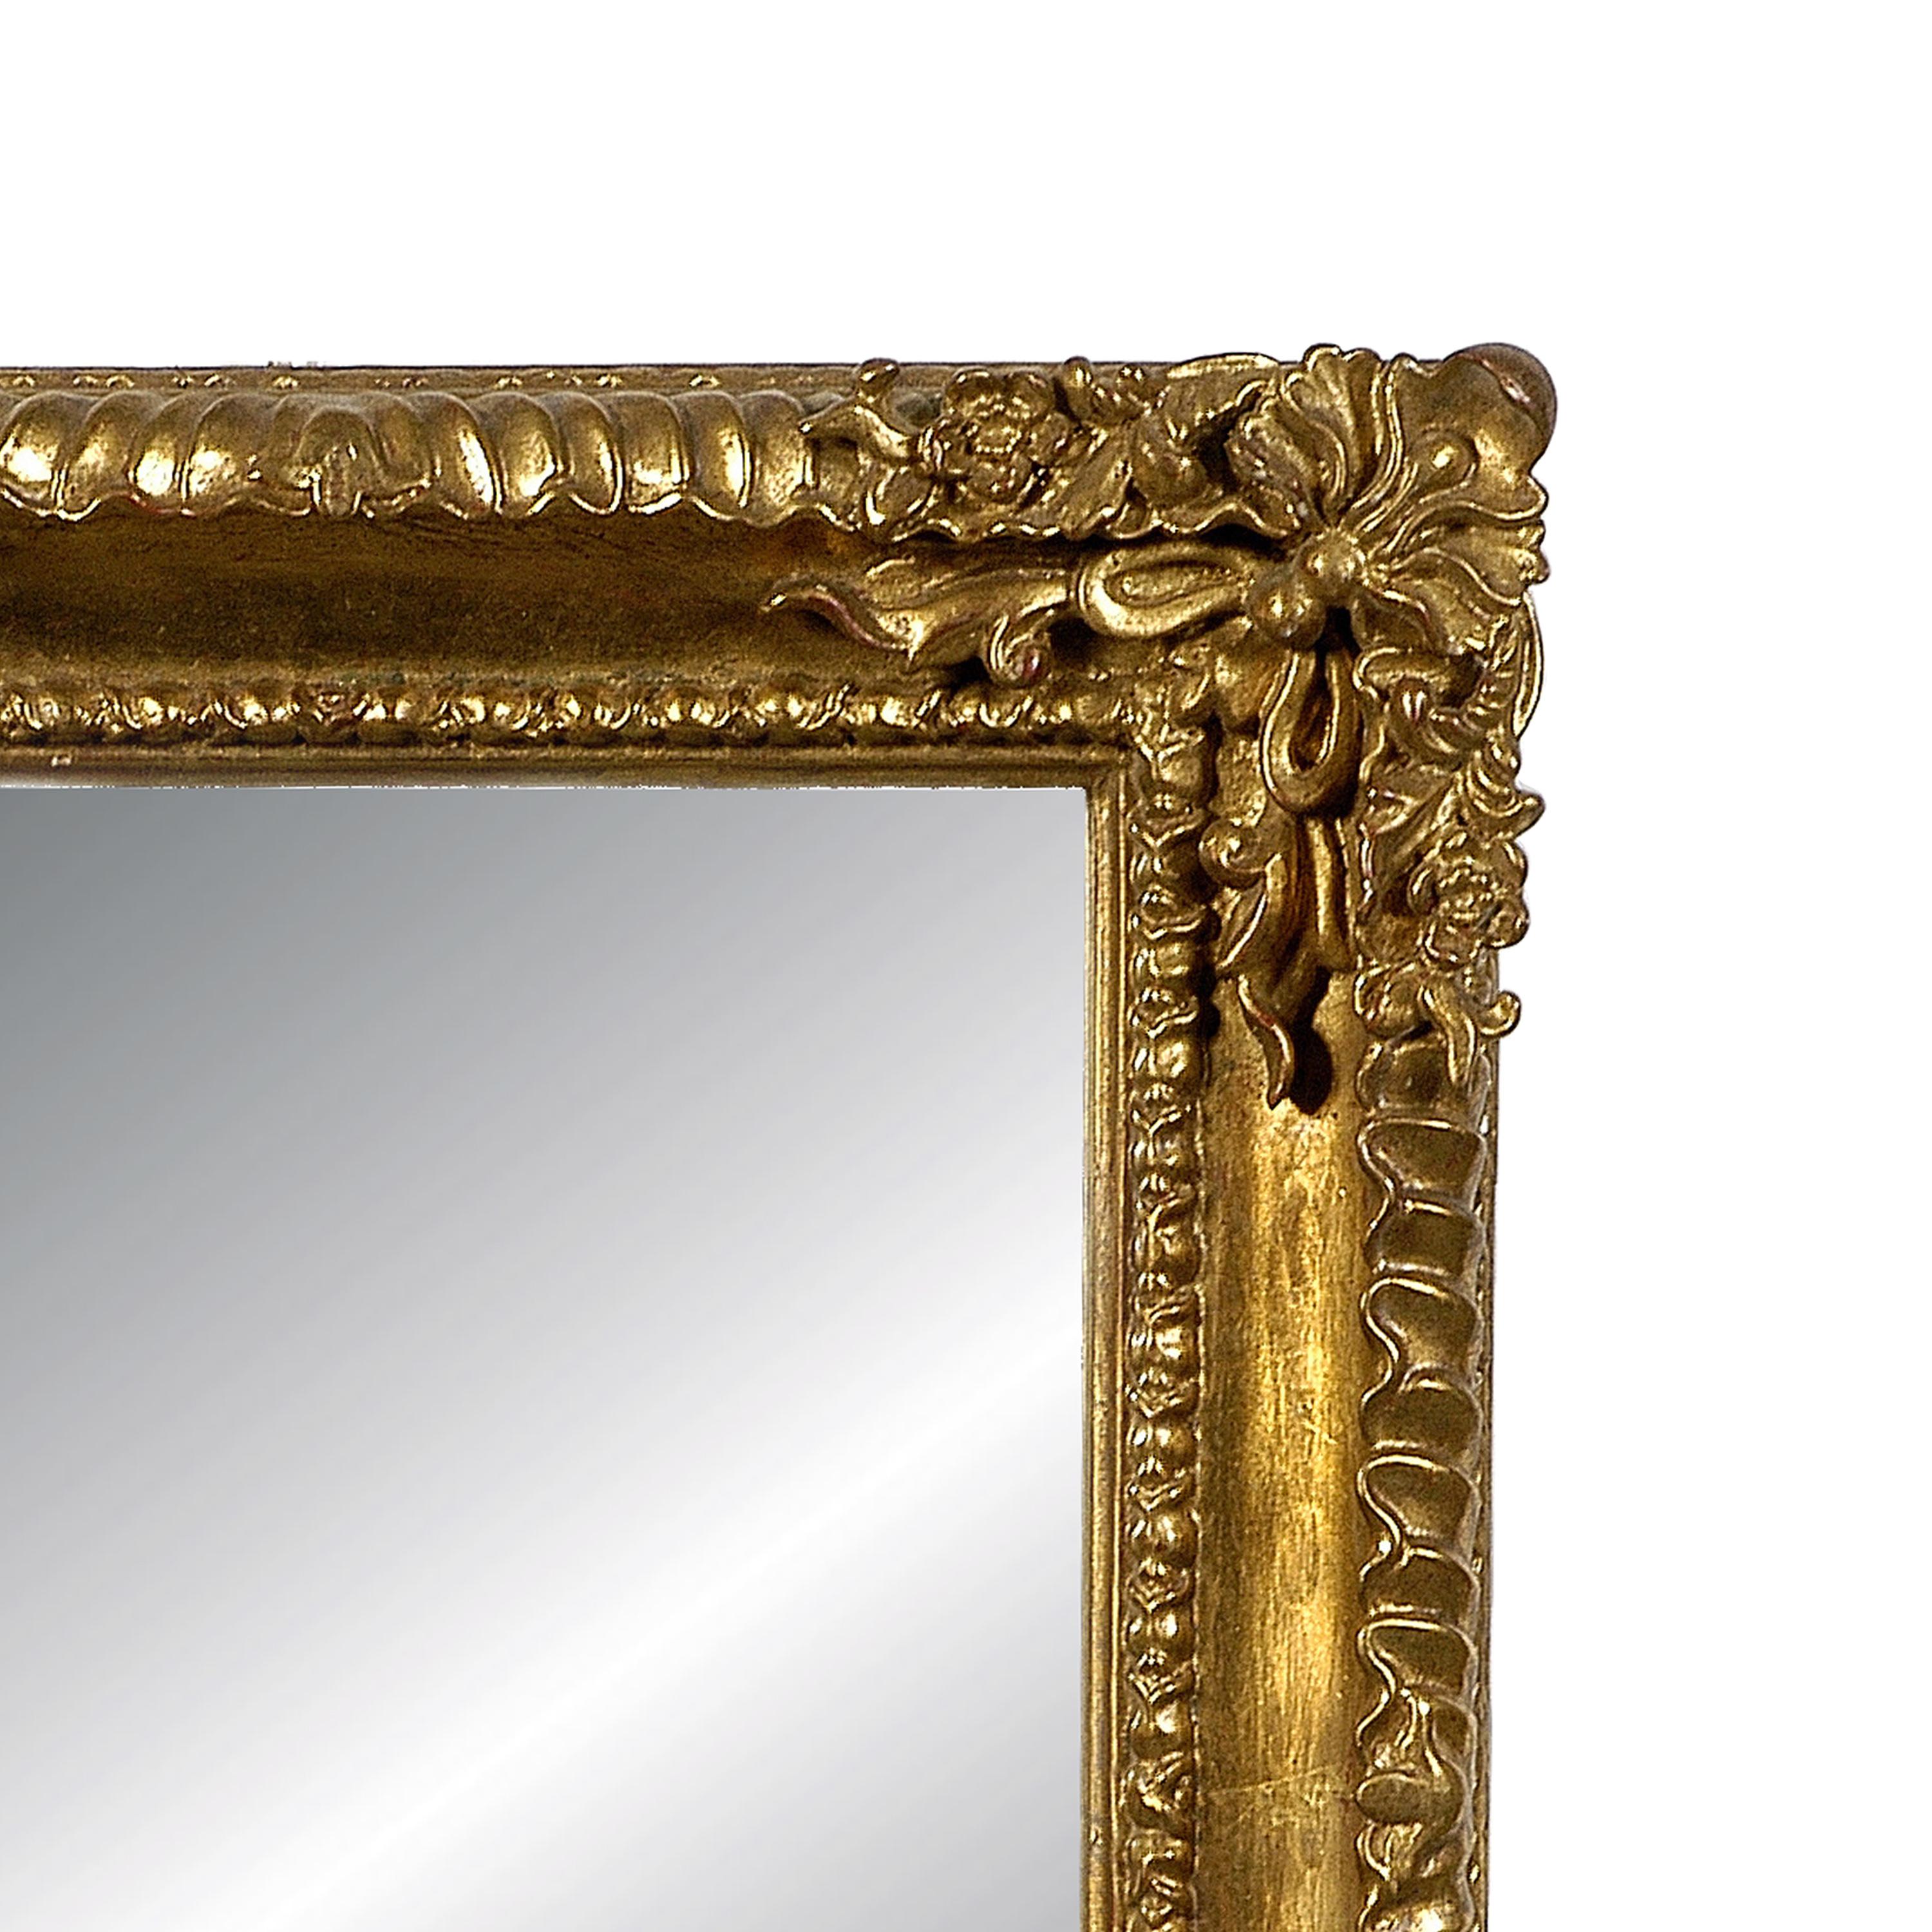 Neoclassical Empire rectangular handcrafted mirror. Rectangular hand carved wooden structure with gold foil finished, Spain, 1970.